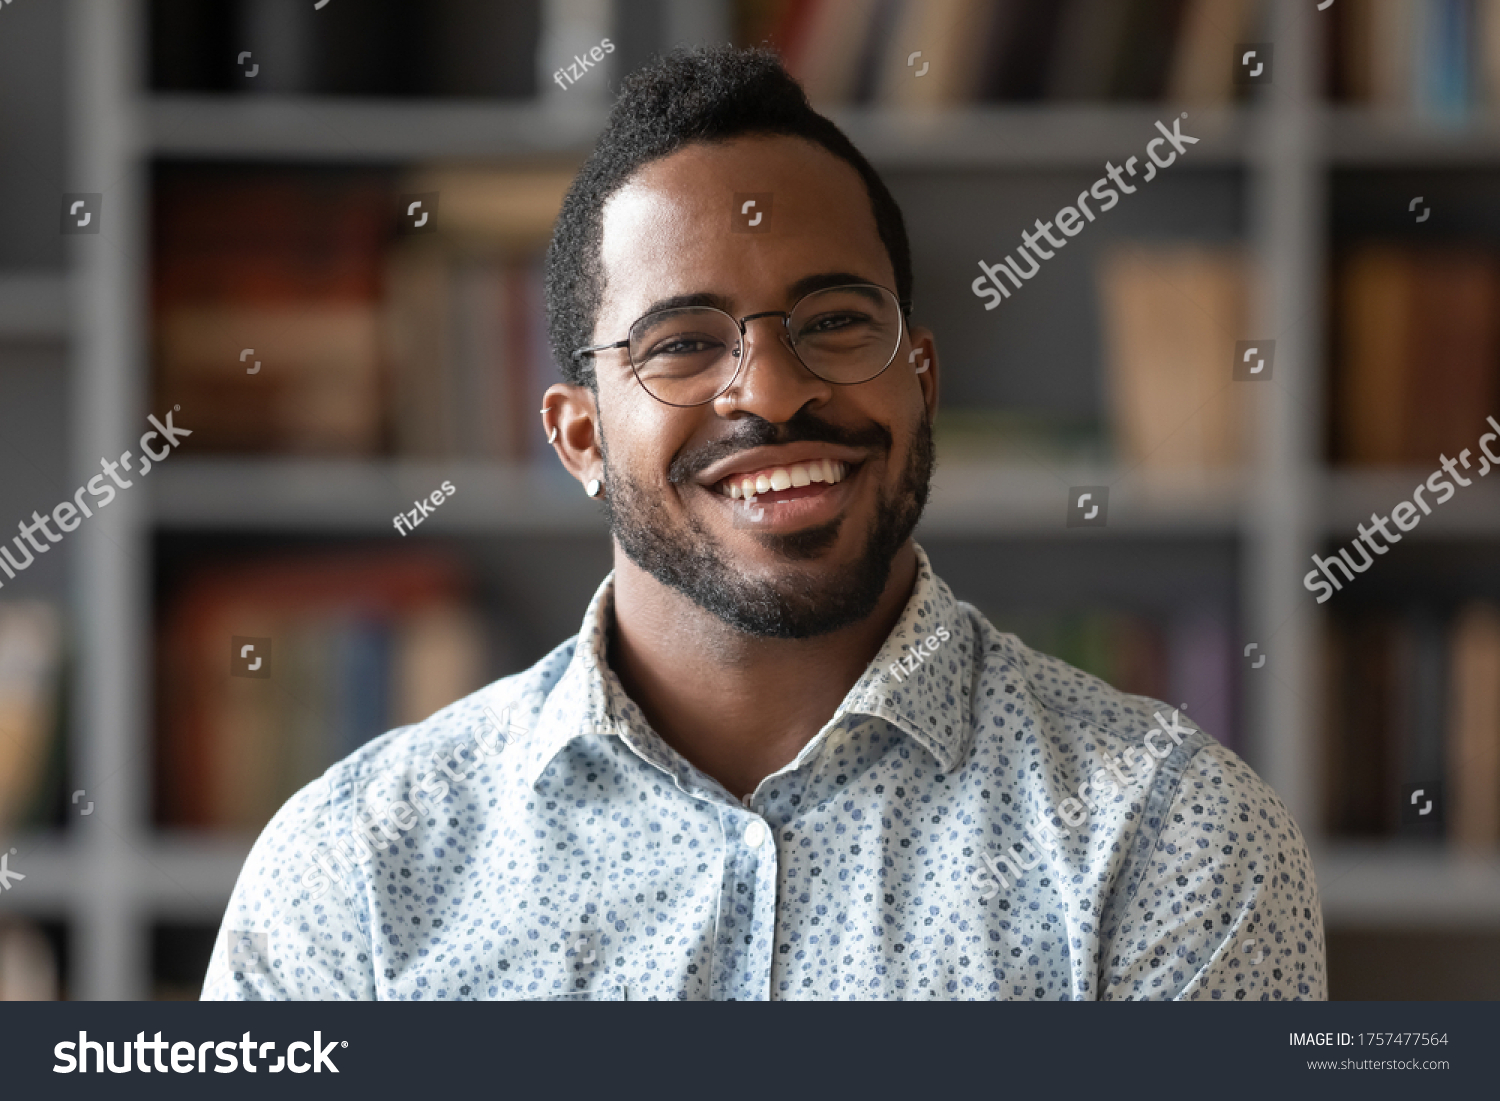 Head shot of african american bearded guy with pierced ear casual shirt smiling looking at camera standing indoor. Webcam view, conference video call, confident company representative portrait concept #1757477564